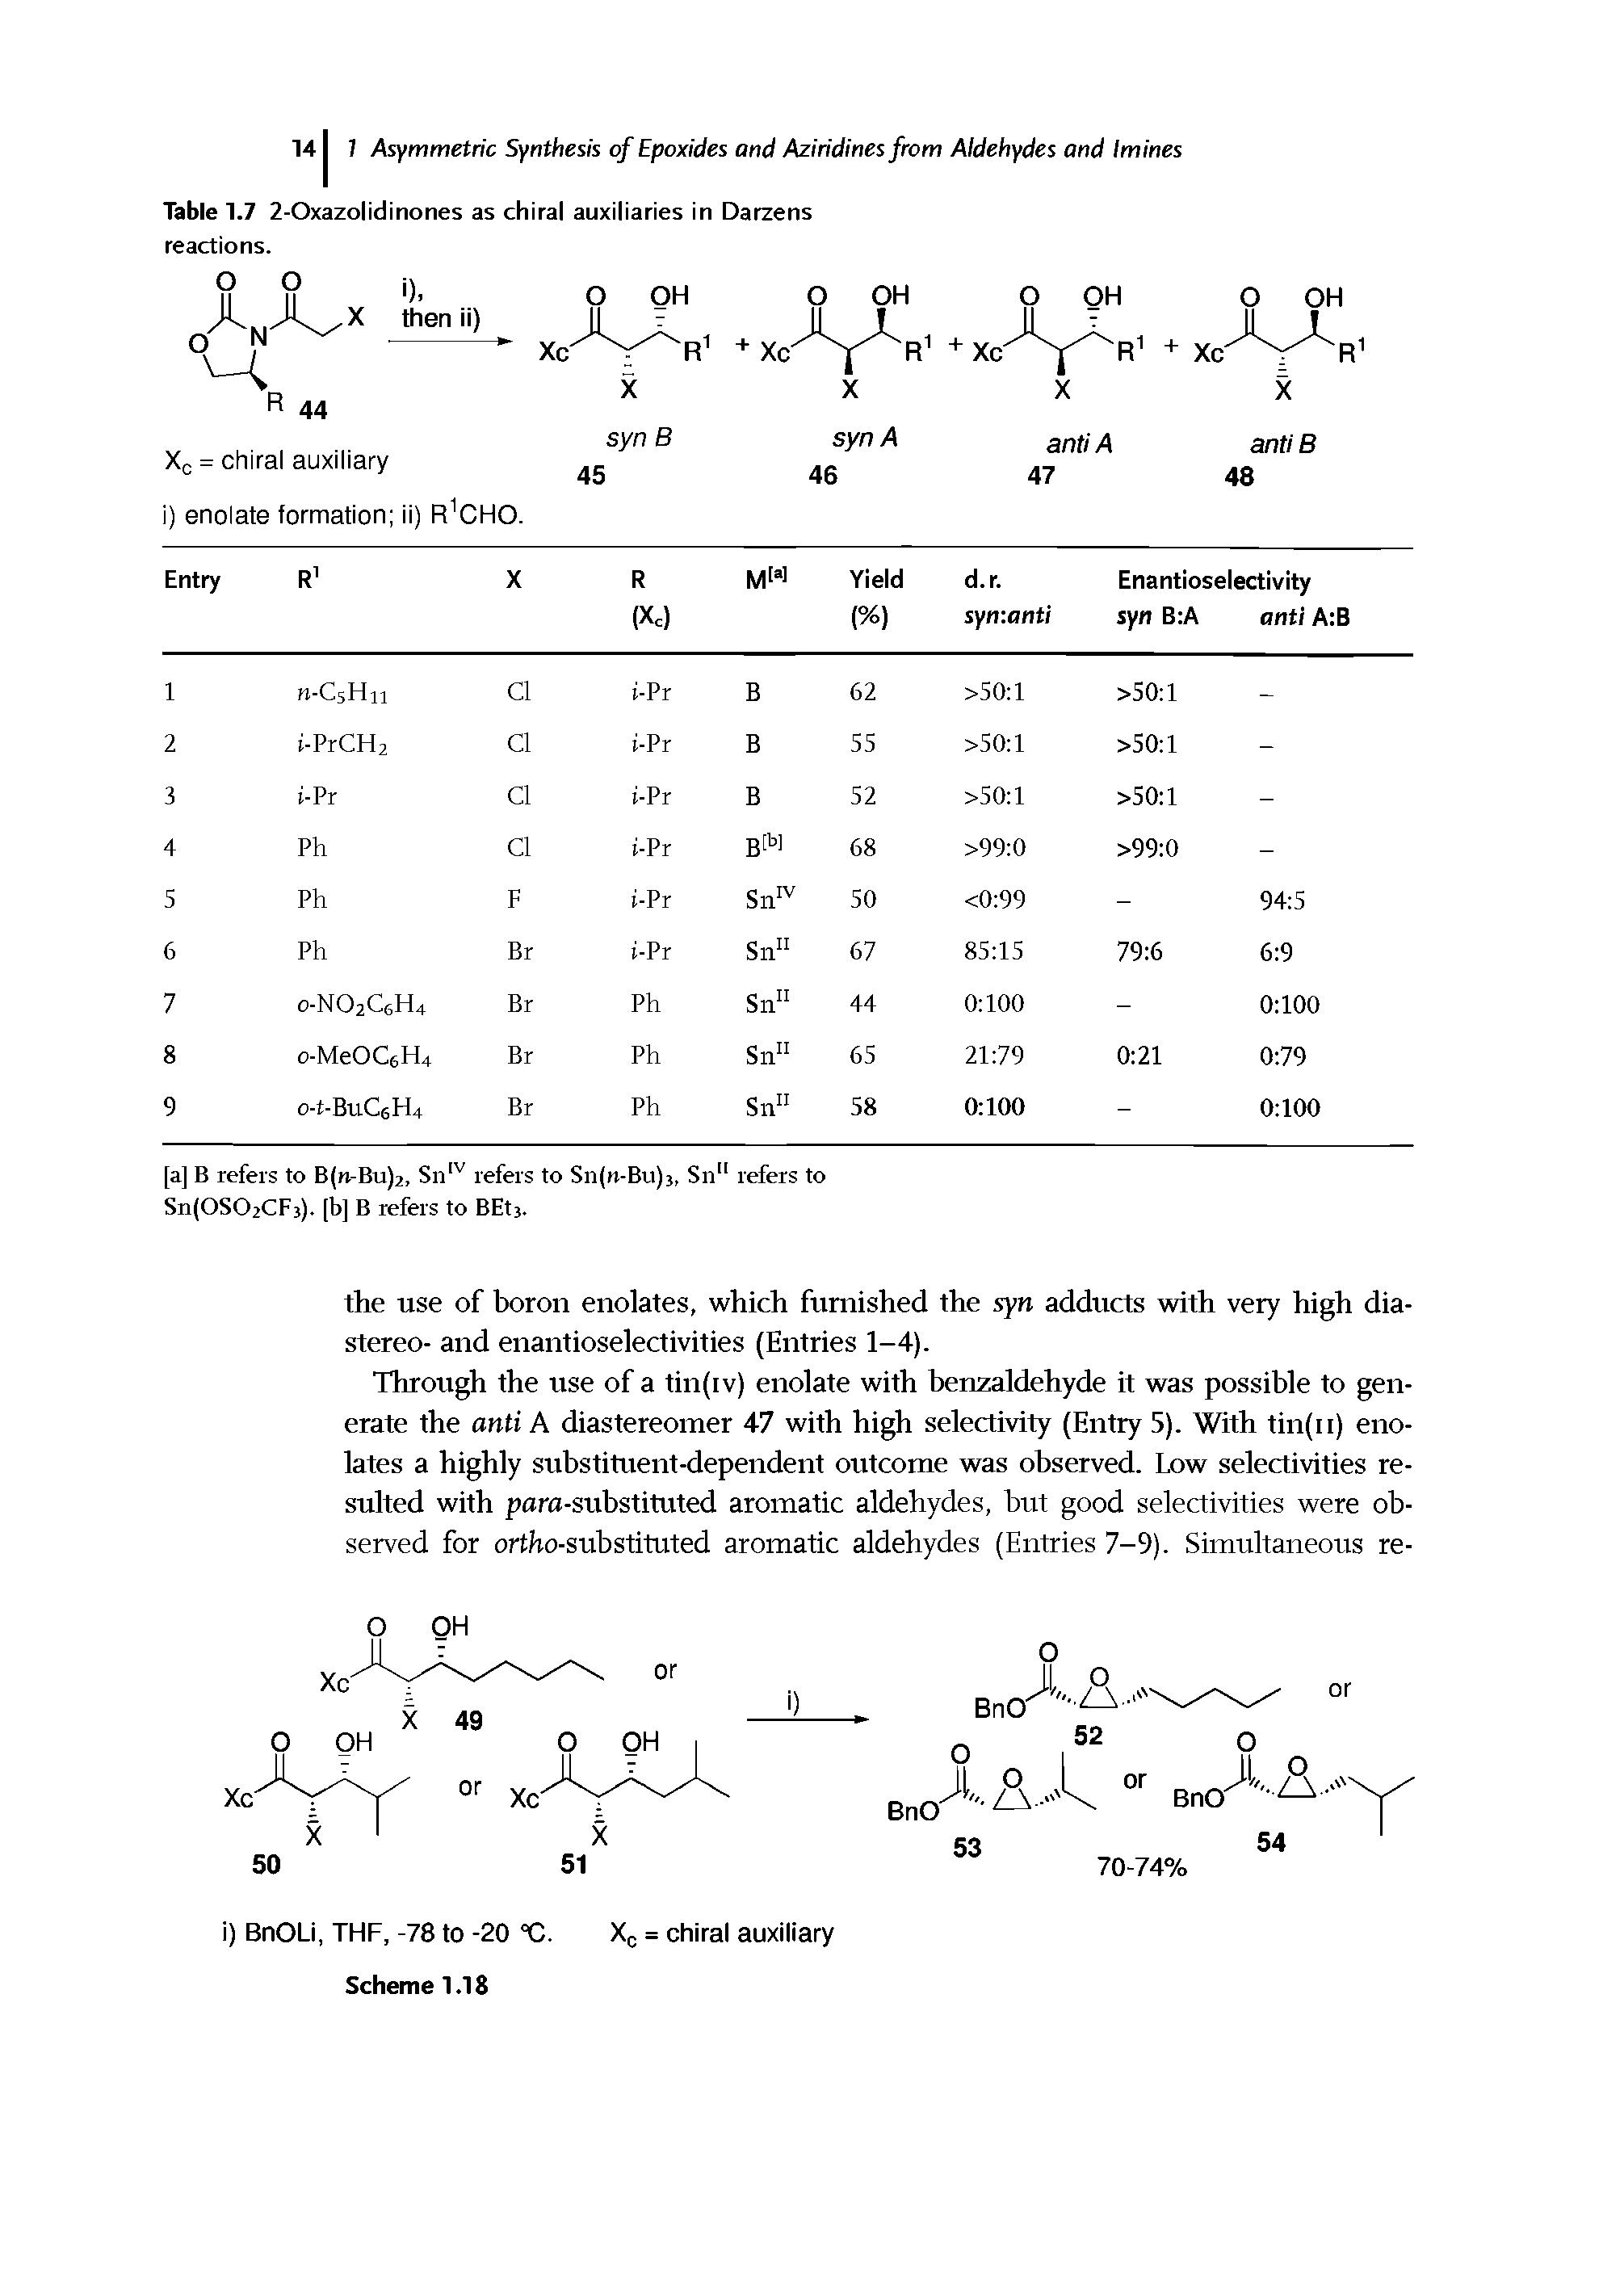 Table 1.7 2-Oxazolidinones as chiral auxiliaries in Darzens reactions.